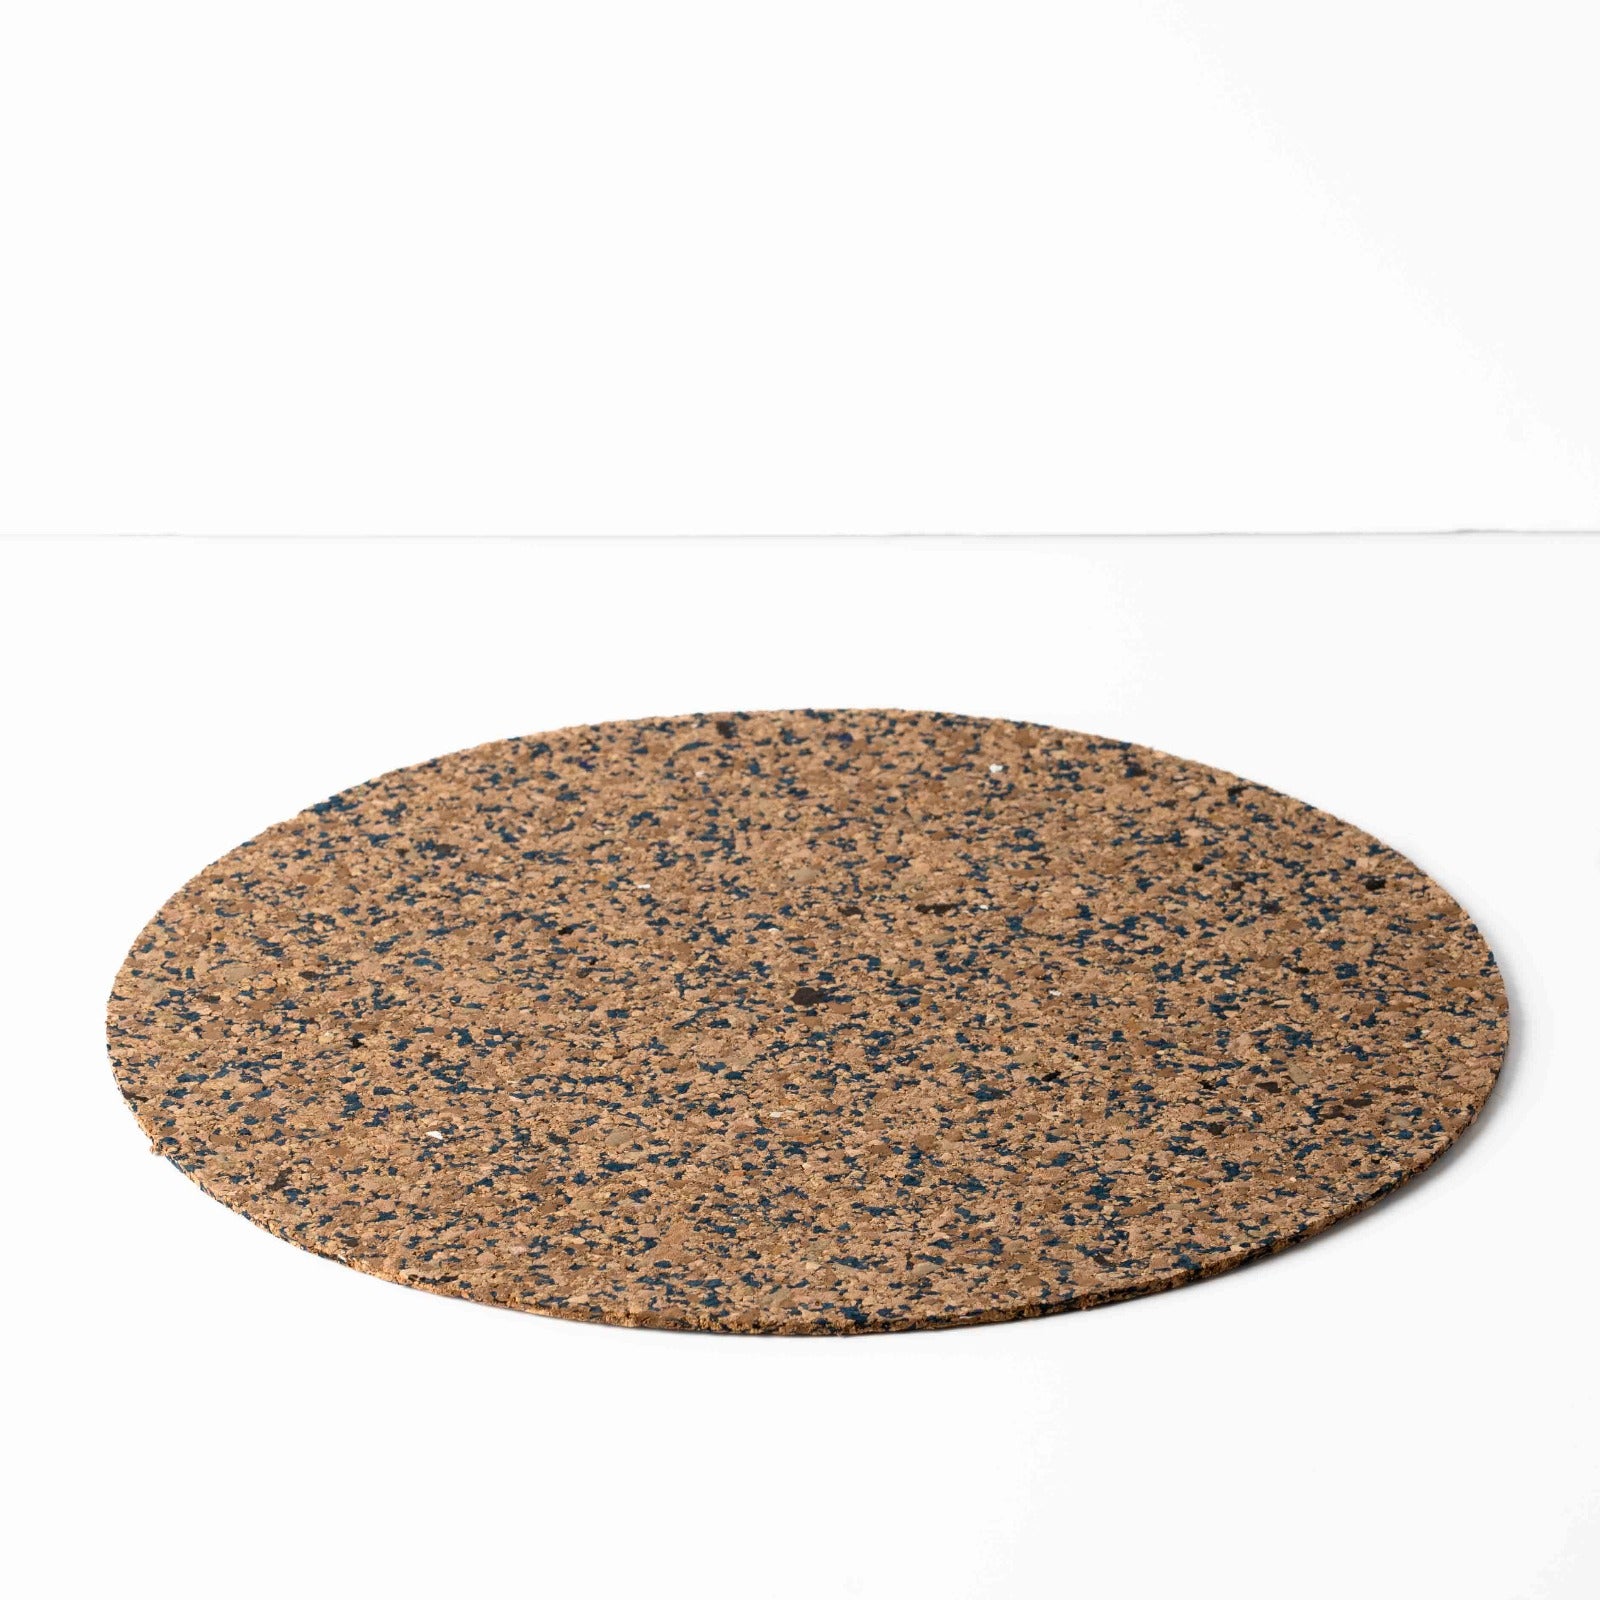 Navy Cork Placemat by Yod and Co